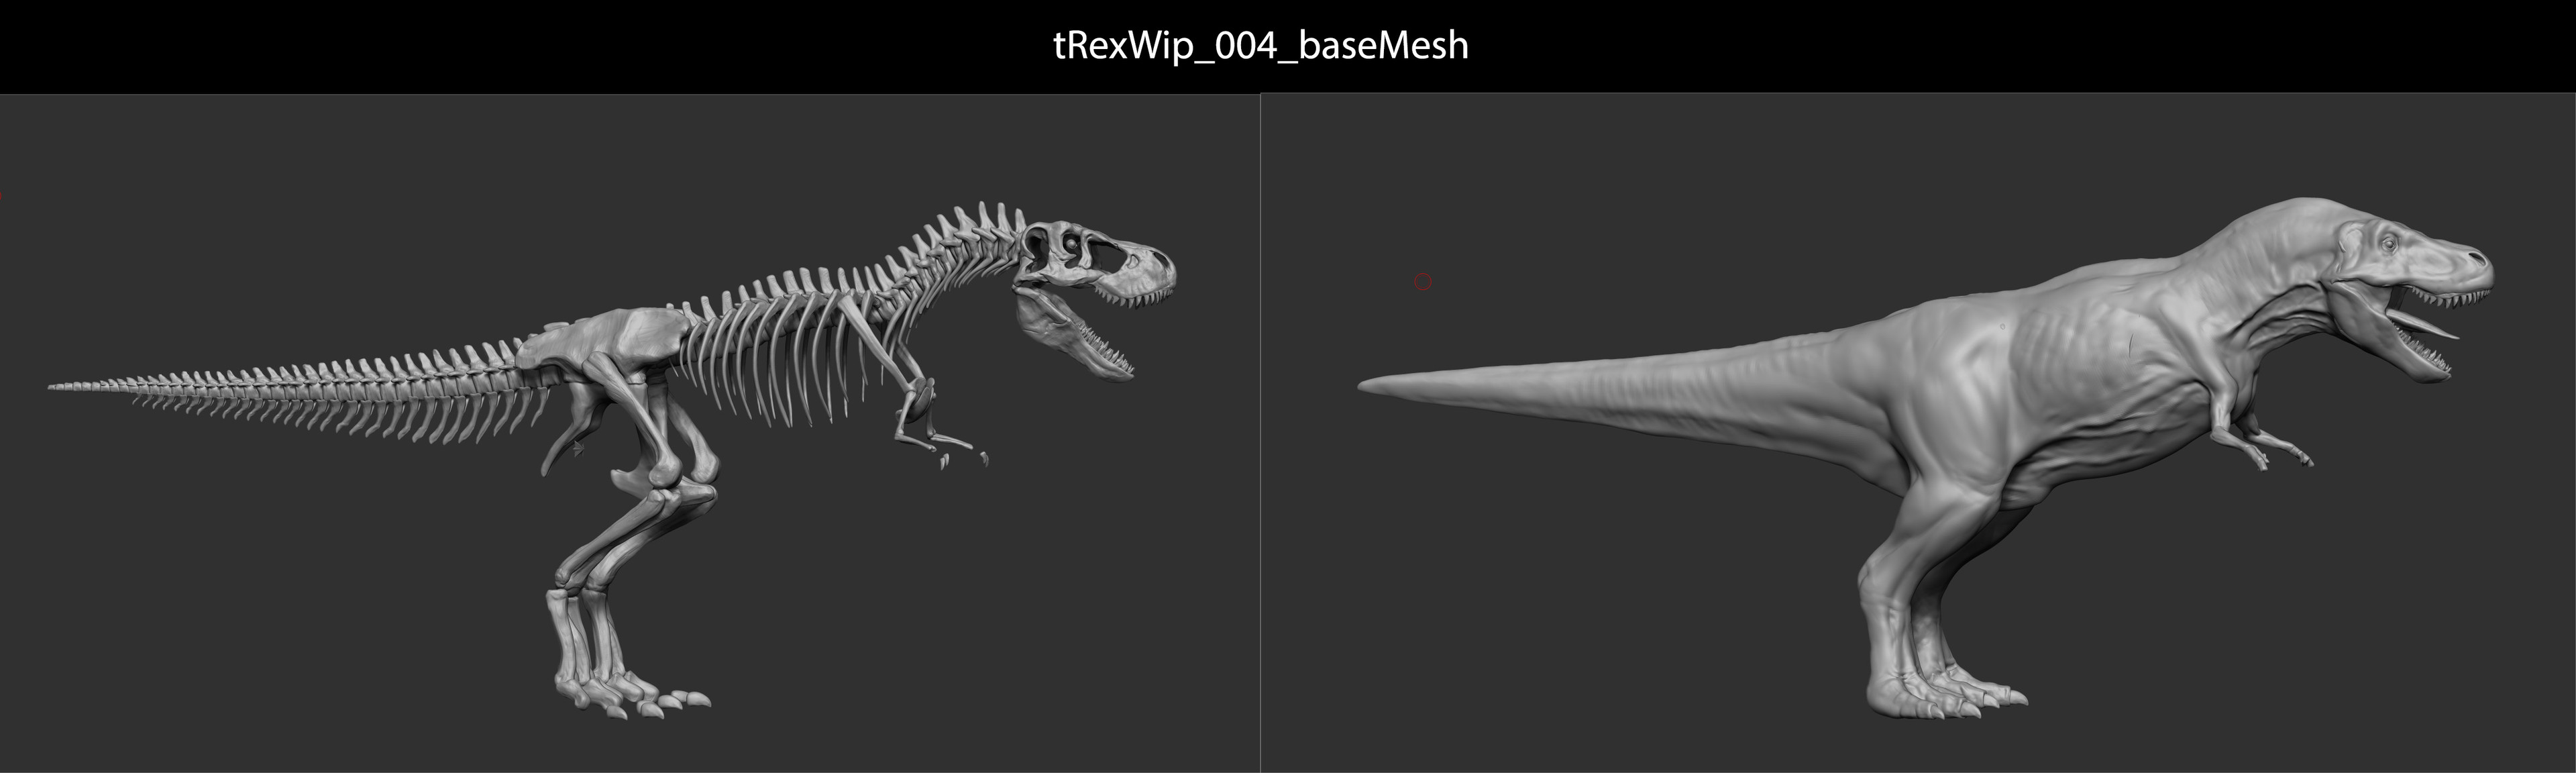 Primary stage of development of the T-Rex. I modeled the bones for muscle simulations and to check the anatomy of my creature.